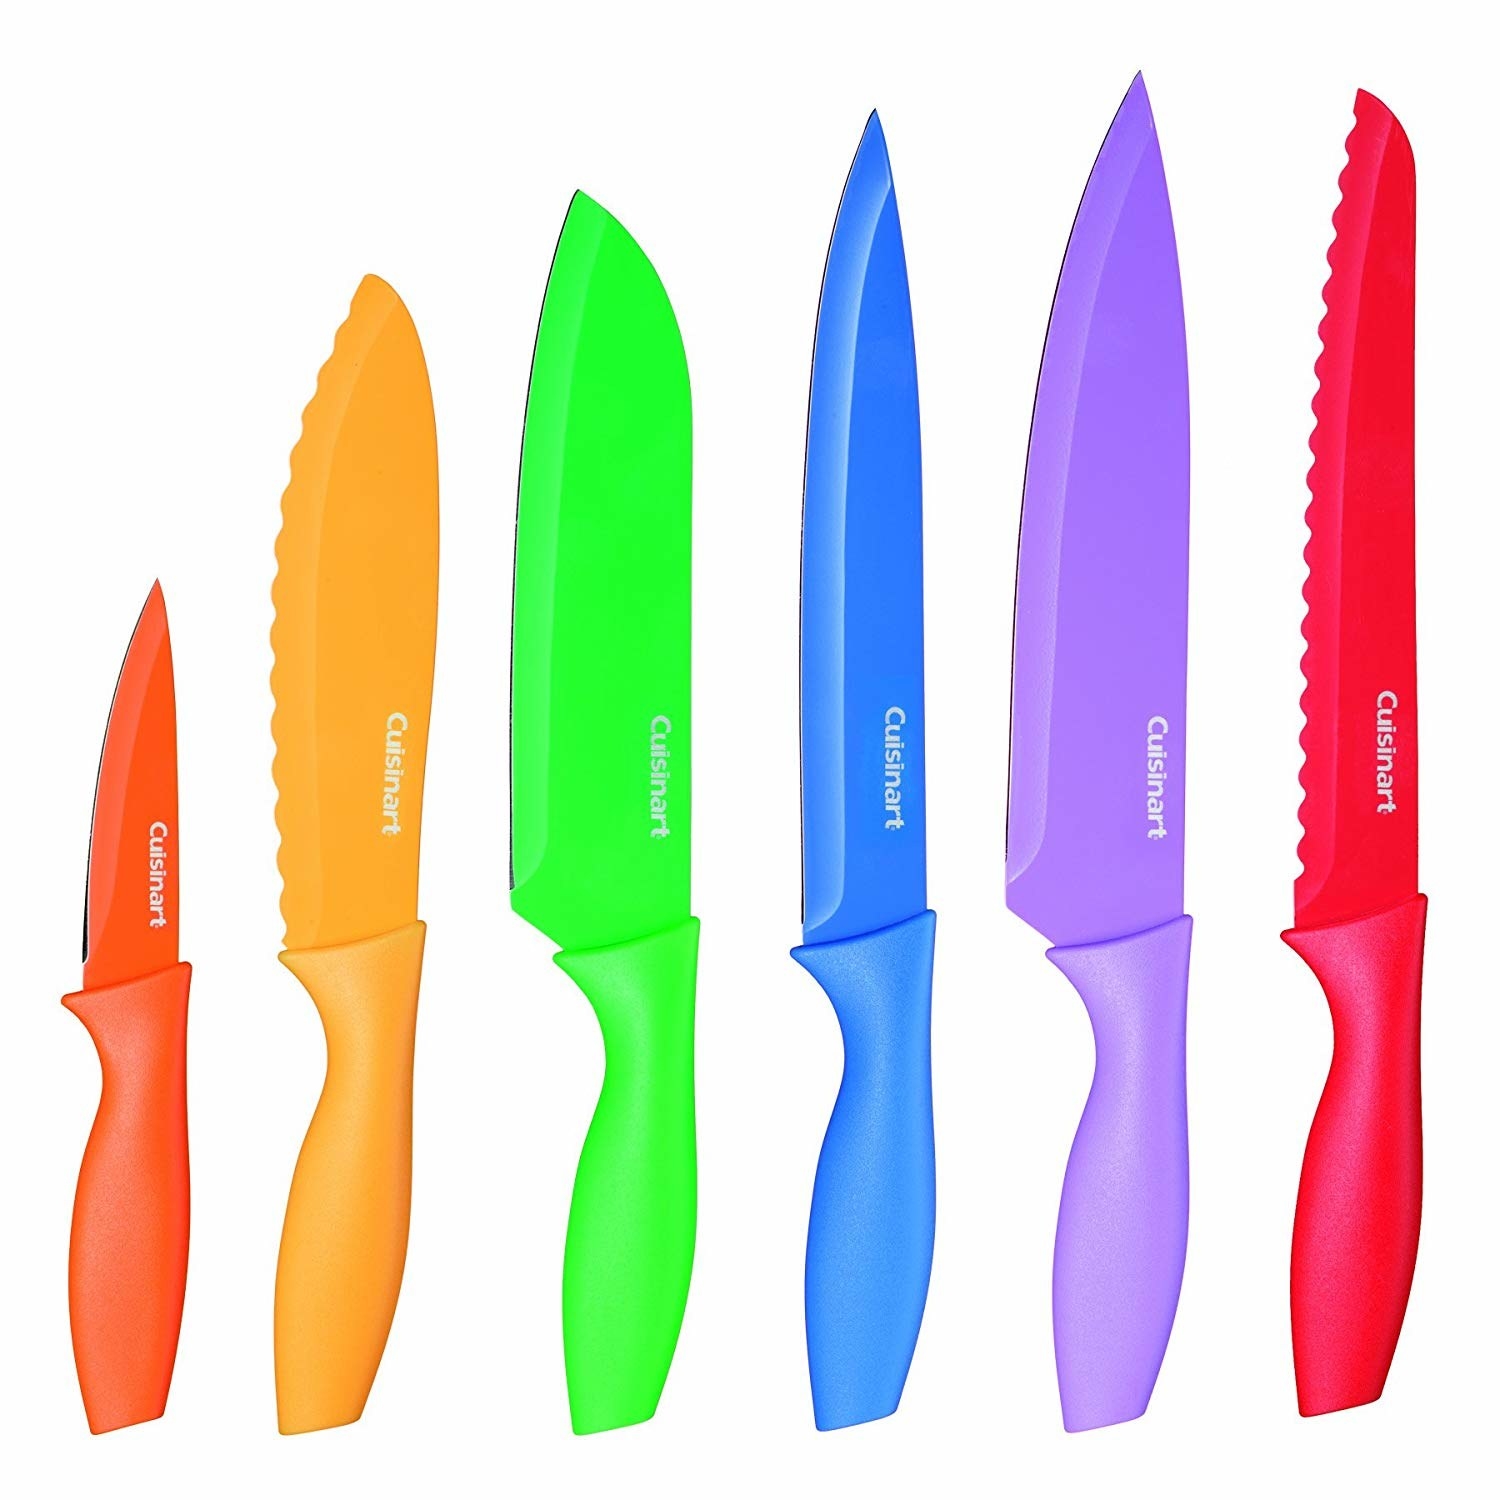 The knives, each of which is a different color of the rainbow 